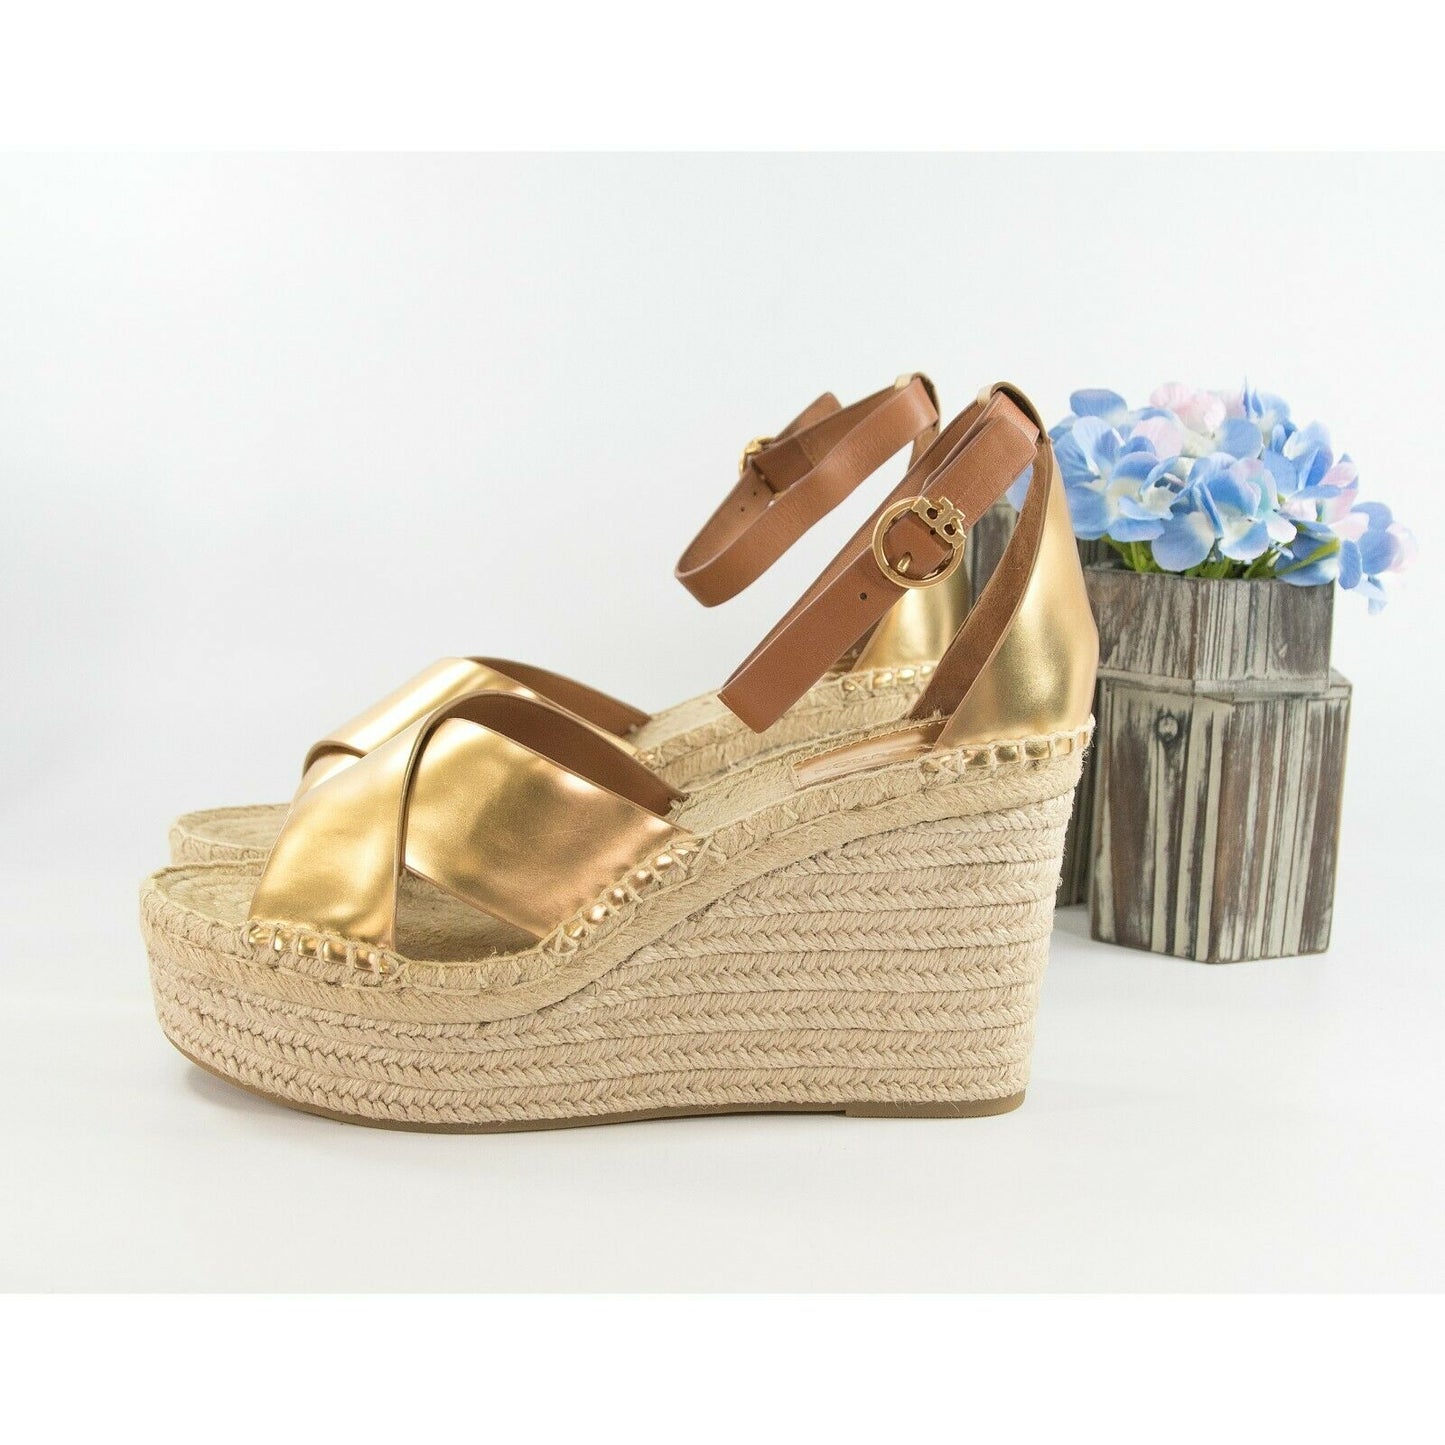 Tory Burch Selby 105MM Old Gold Calf Leather Platform Espadrille Wedge Heels 9.5